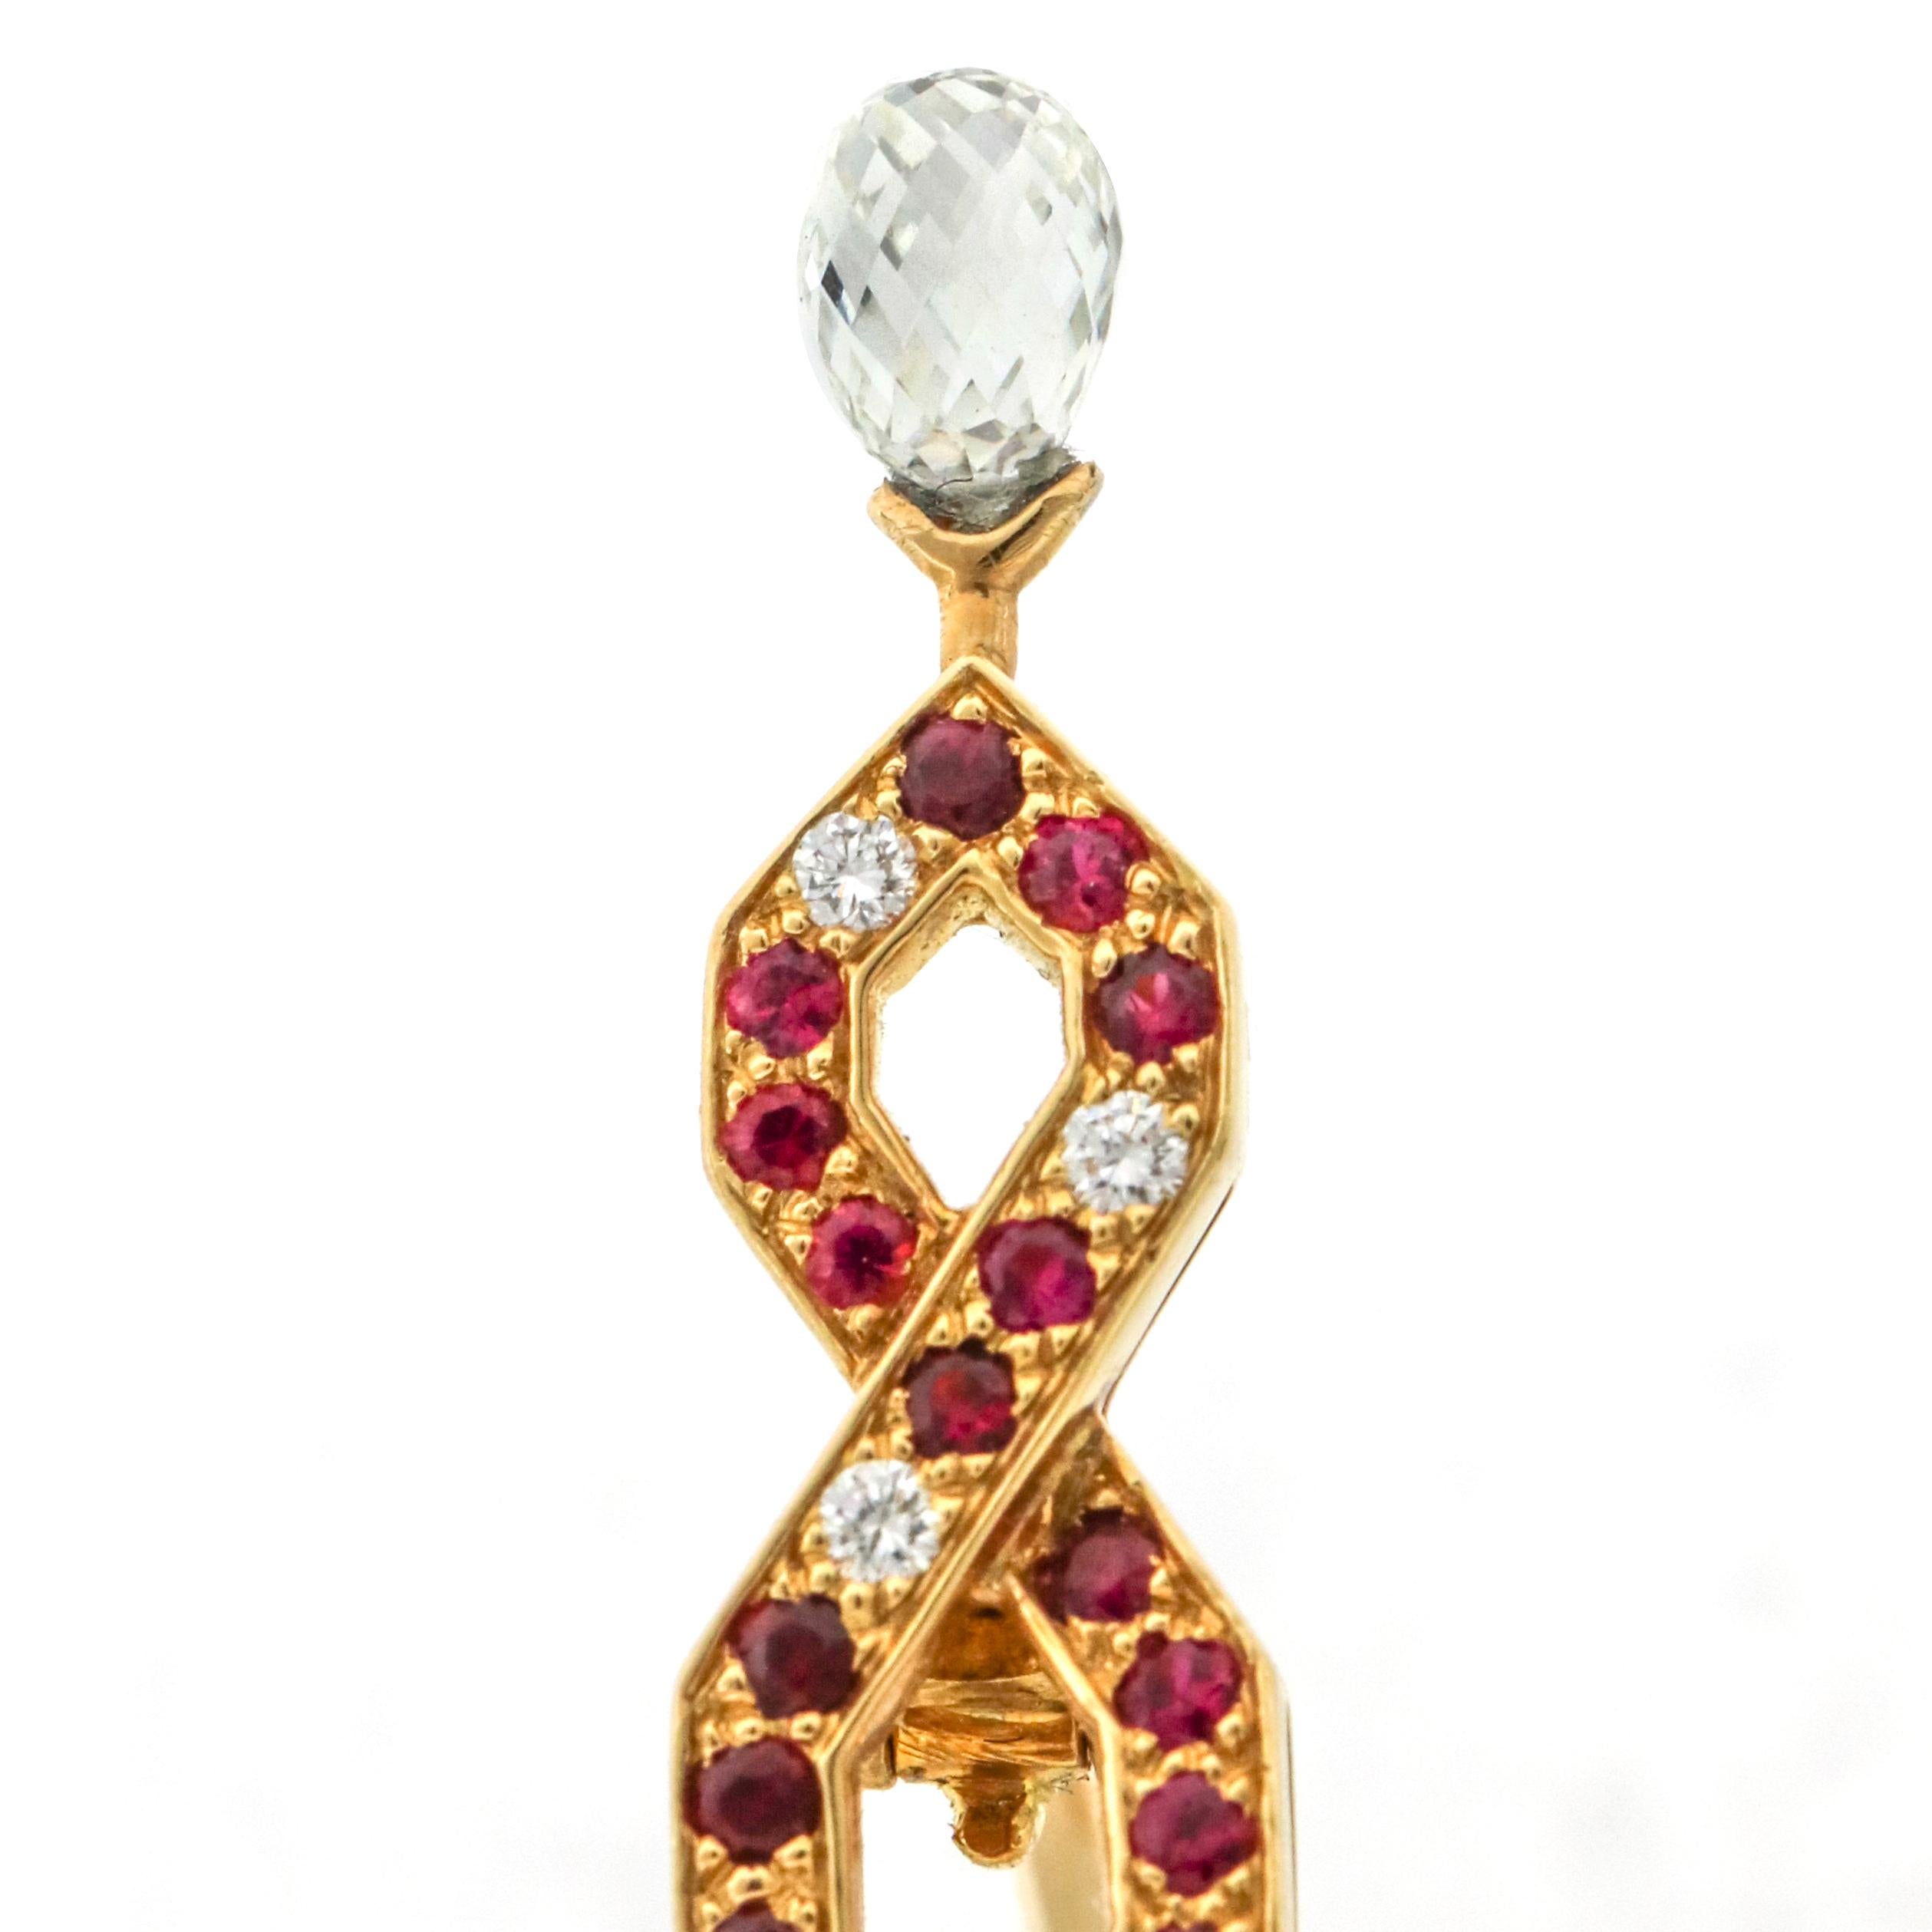 Paris Eiffel Tower brooch by Boucheron crafted in 18-karat yellow gold with rubies and diamonds. The pin has 149 round natural rubies, 17 round brilliant cut diamonds and a pear shaped faceted diamond. Signed, Boucheron with serial number.

Ruby